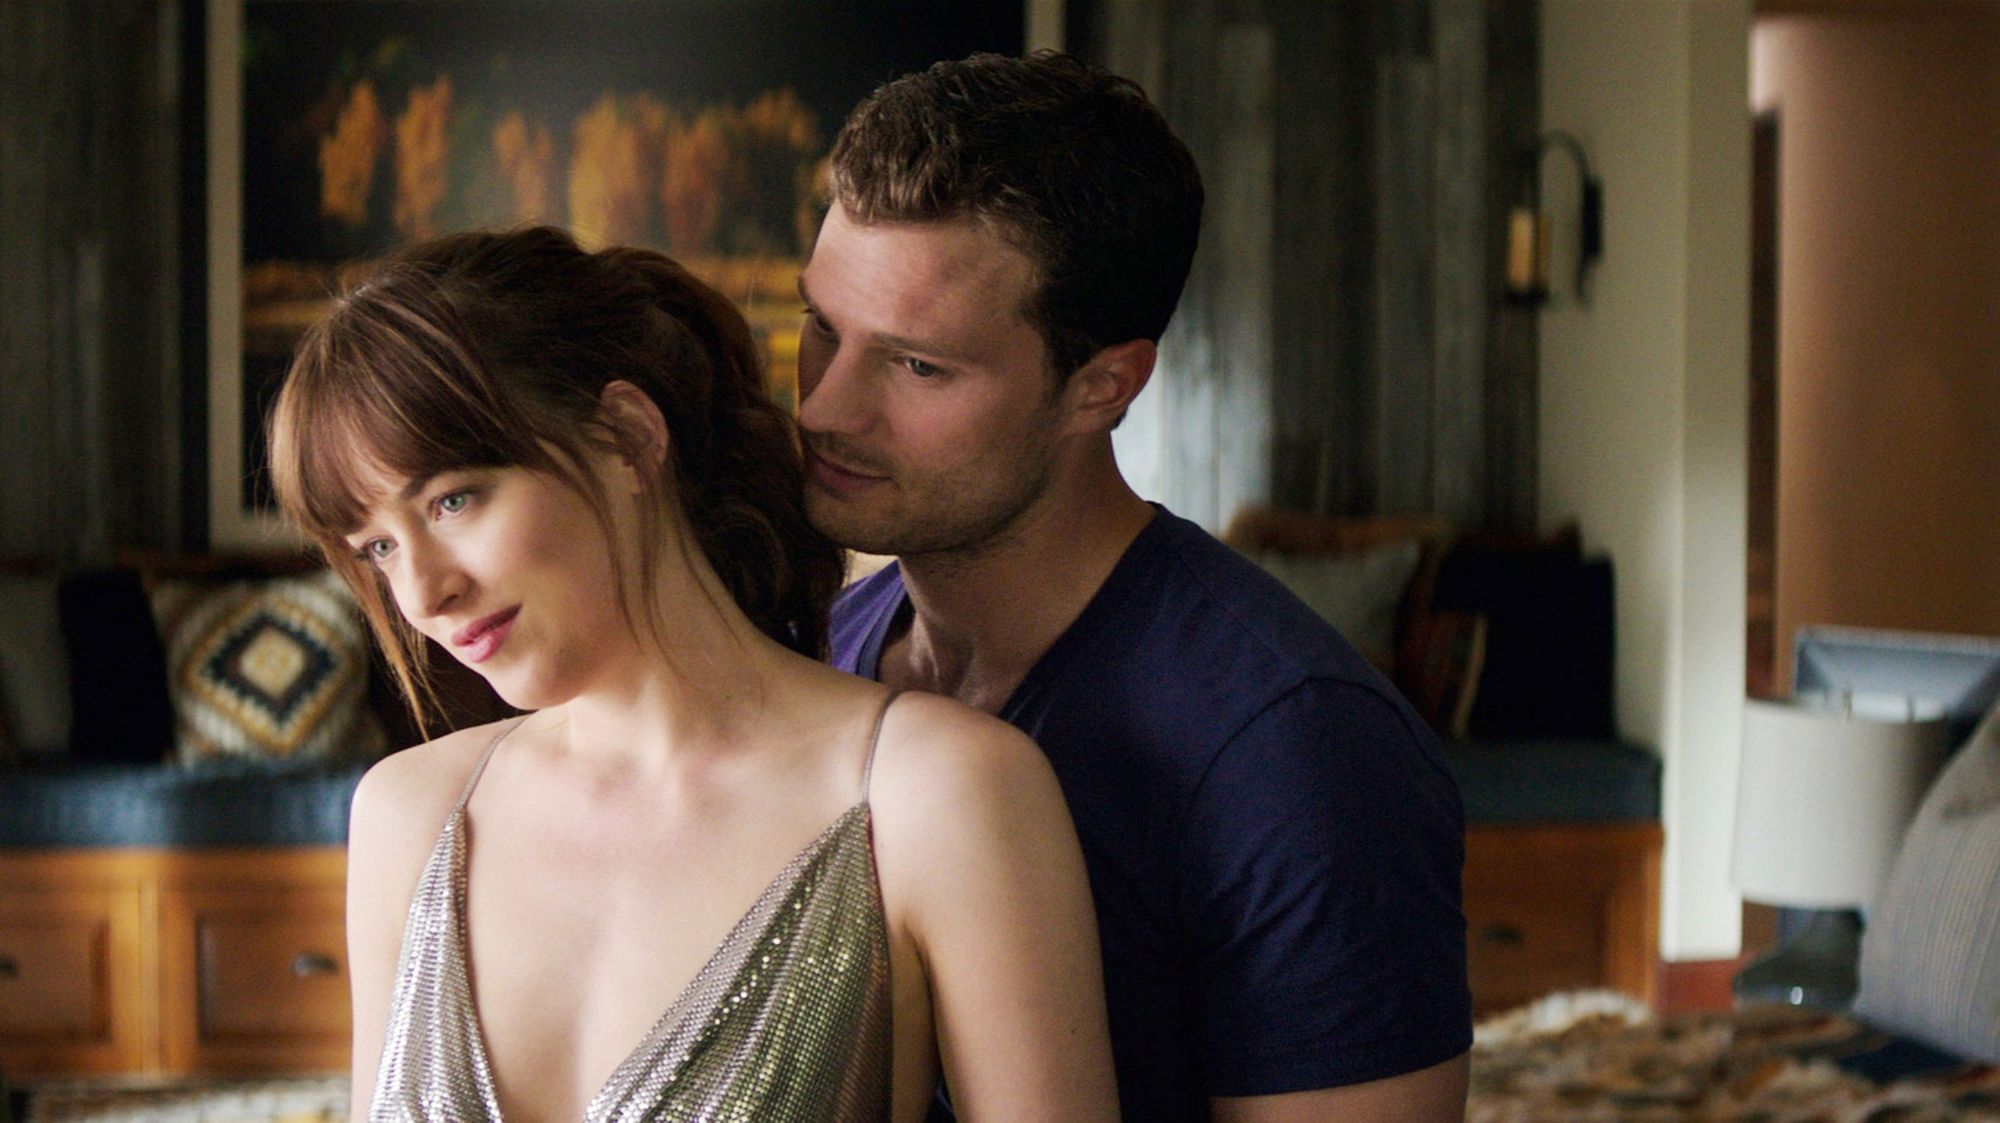 How to Watch Fifty Shades Freed on Netflix - Best VPNs To Use